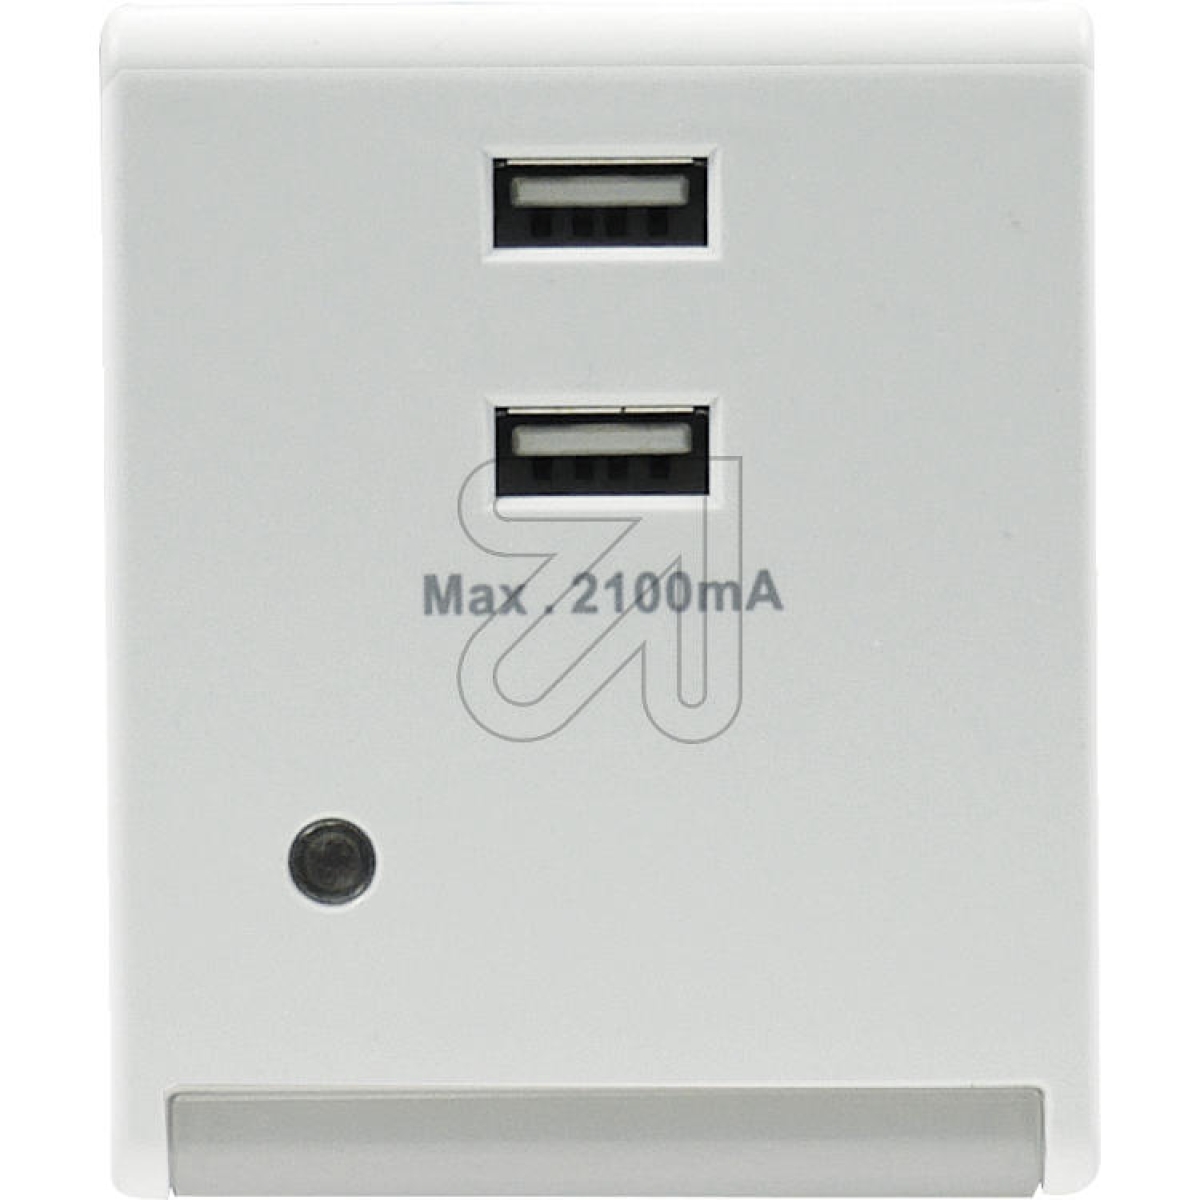 REV RITTER GMBHLED night light 0020810102 with integrated USB 2.0 chargerArticle-No: 067380